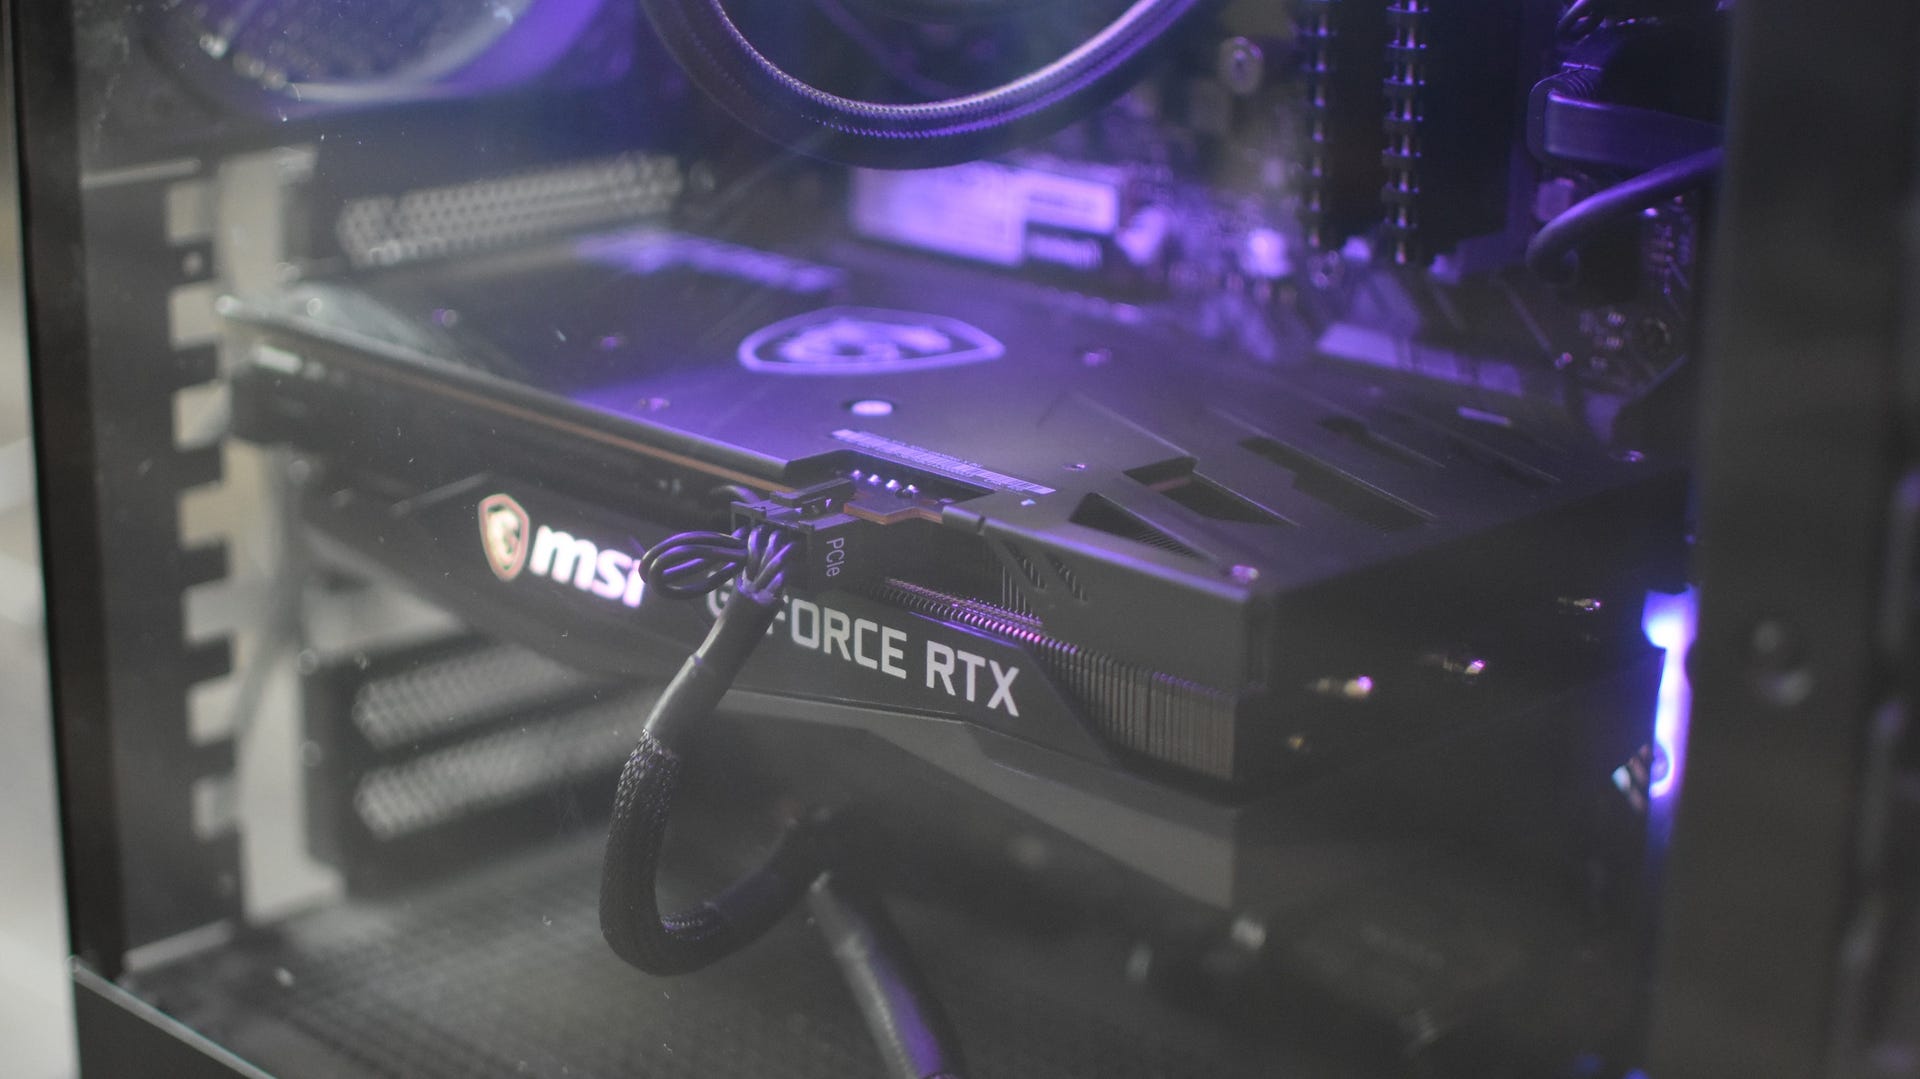 Nvidia GeForce RTX 3050 Review